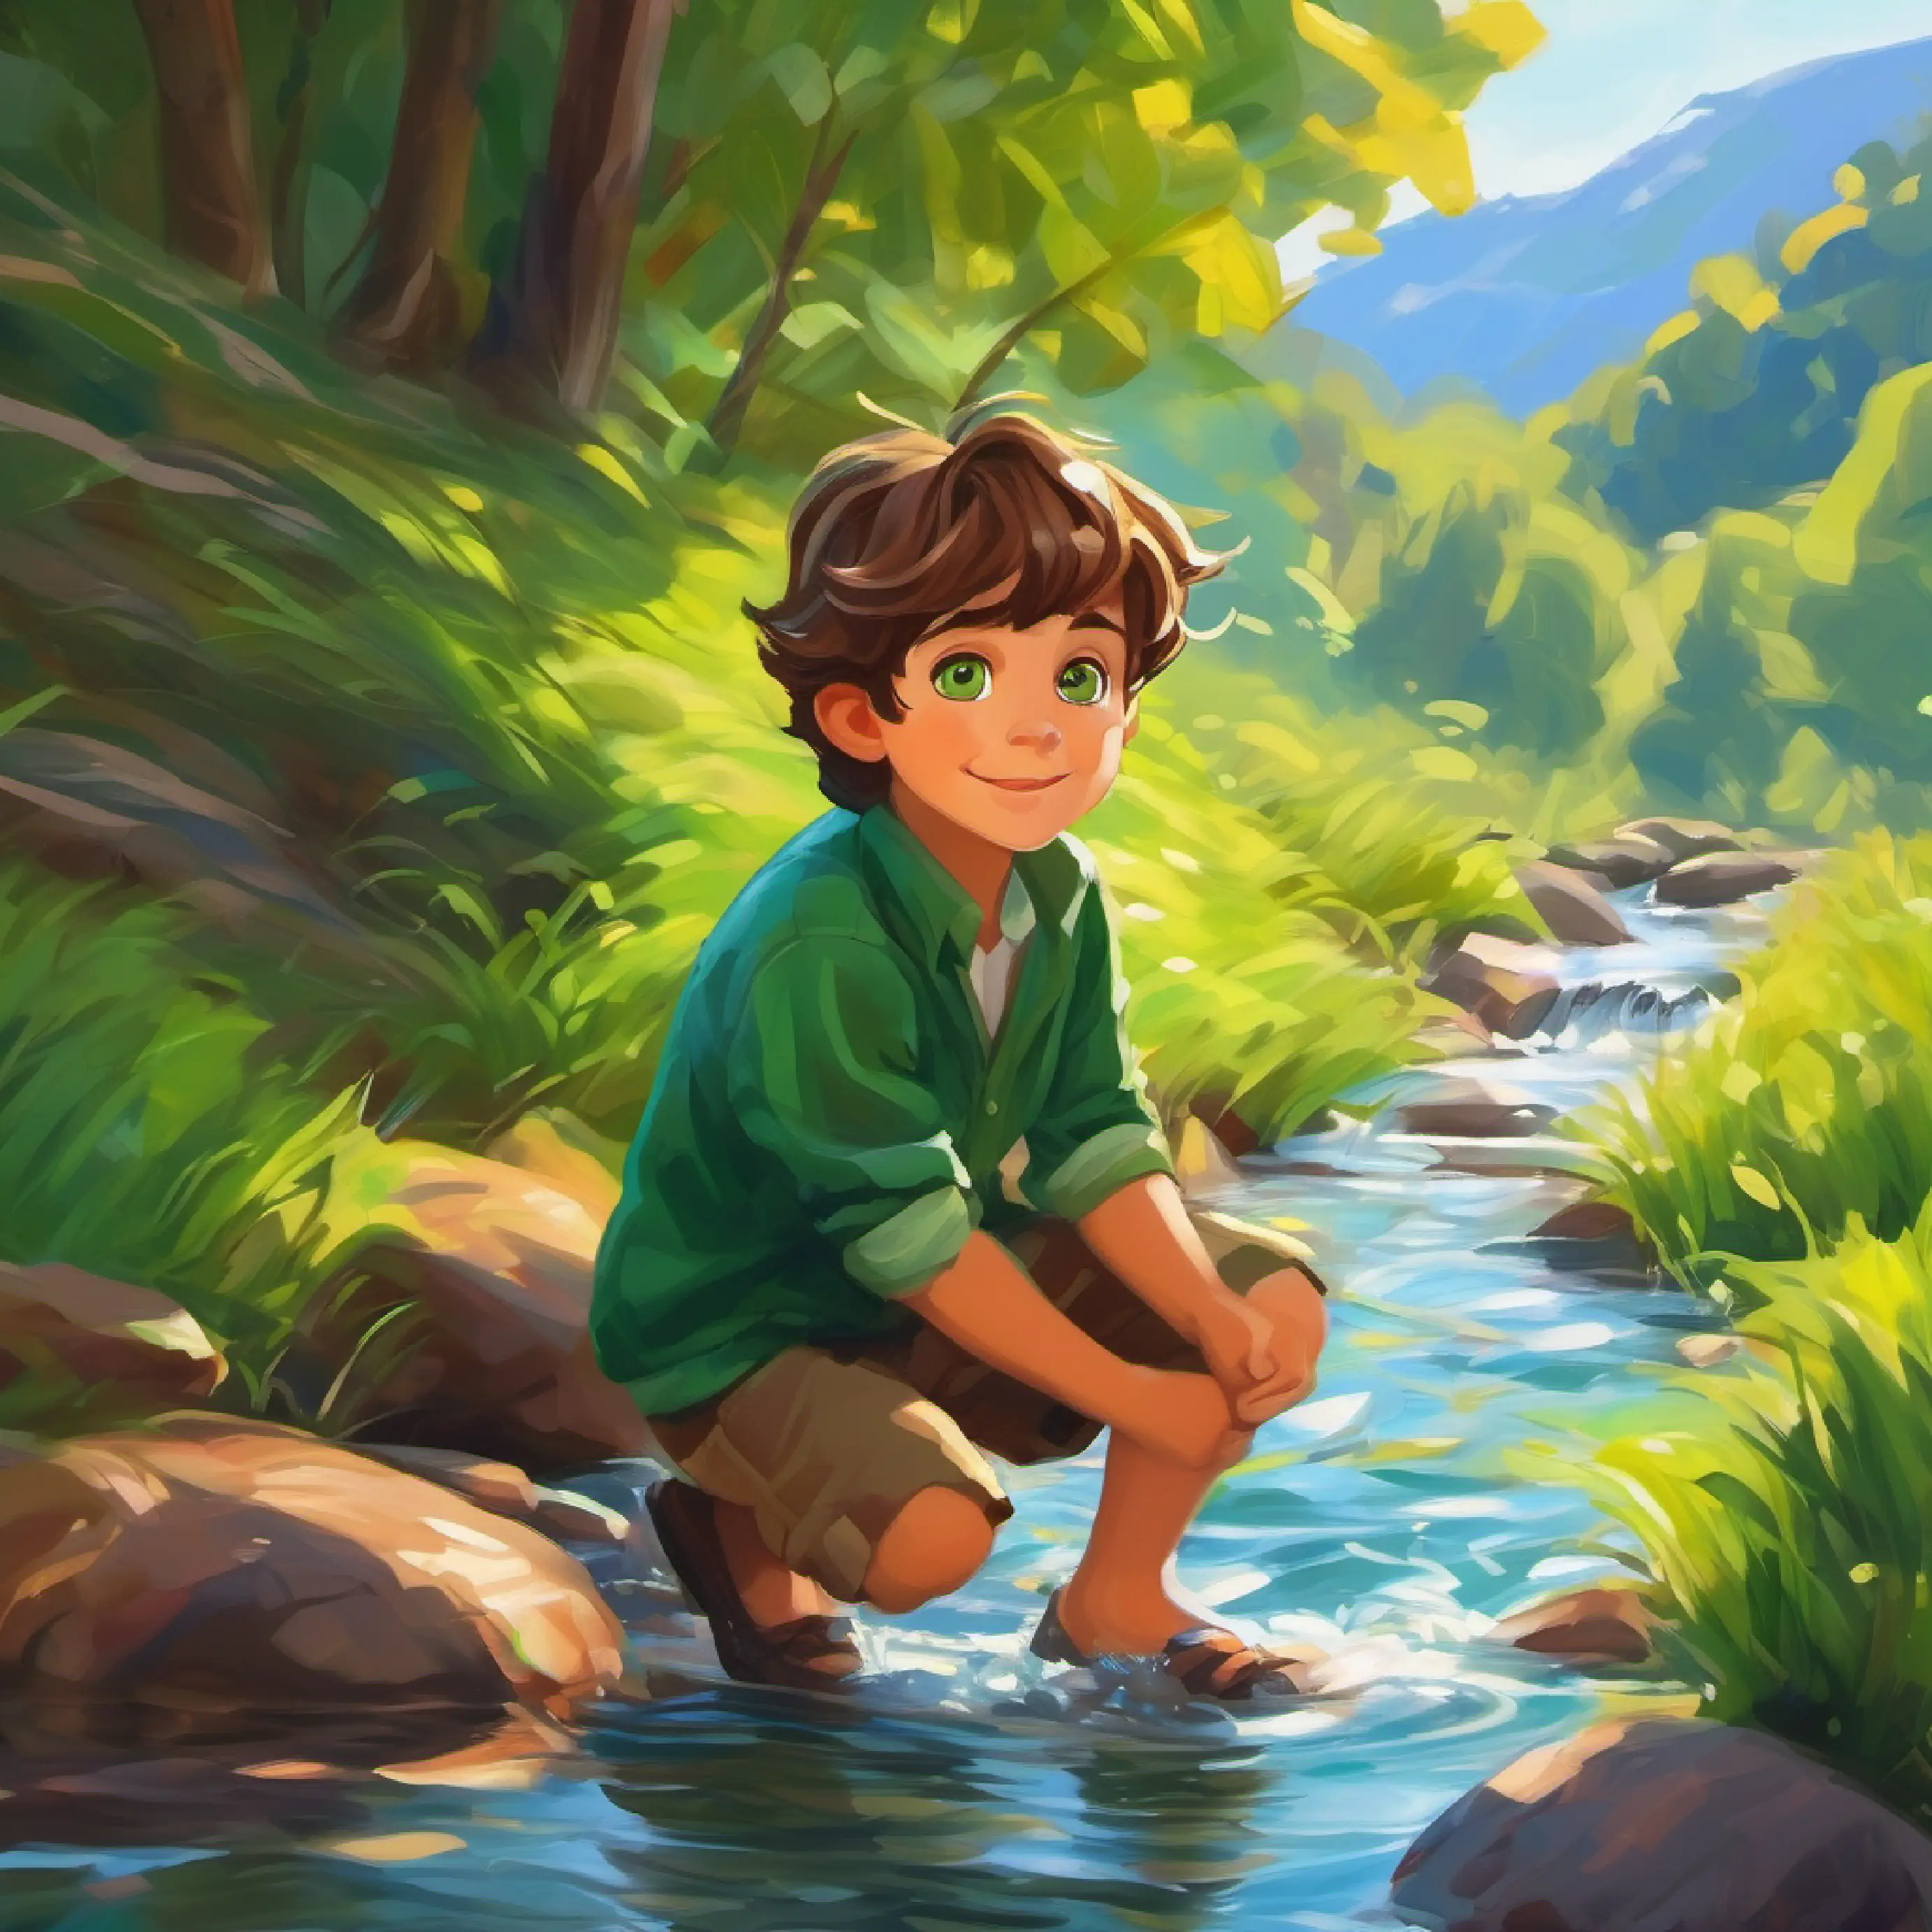 Discovering a stream, Young boy with brown hair, fair skin, and green eyes enjoys the cool water.